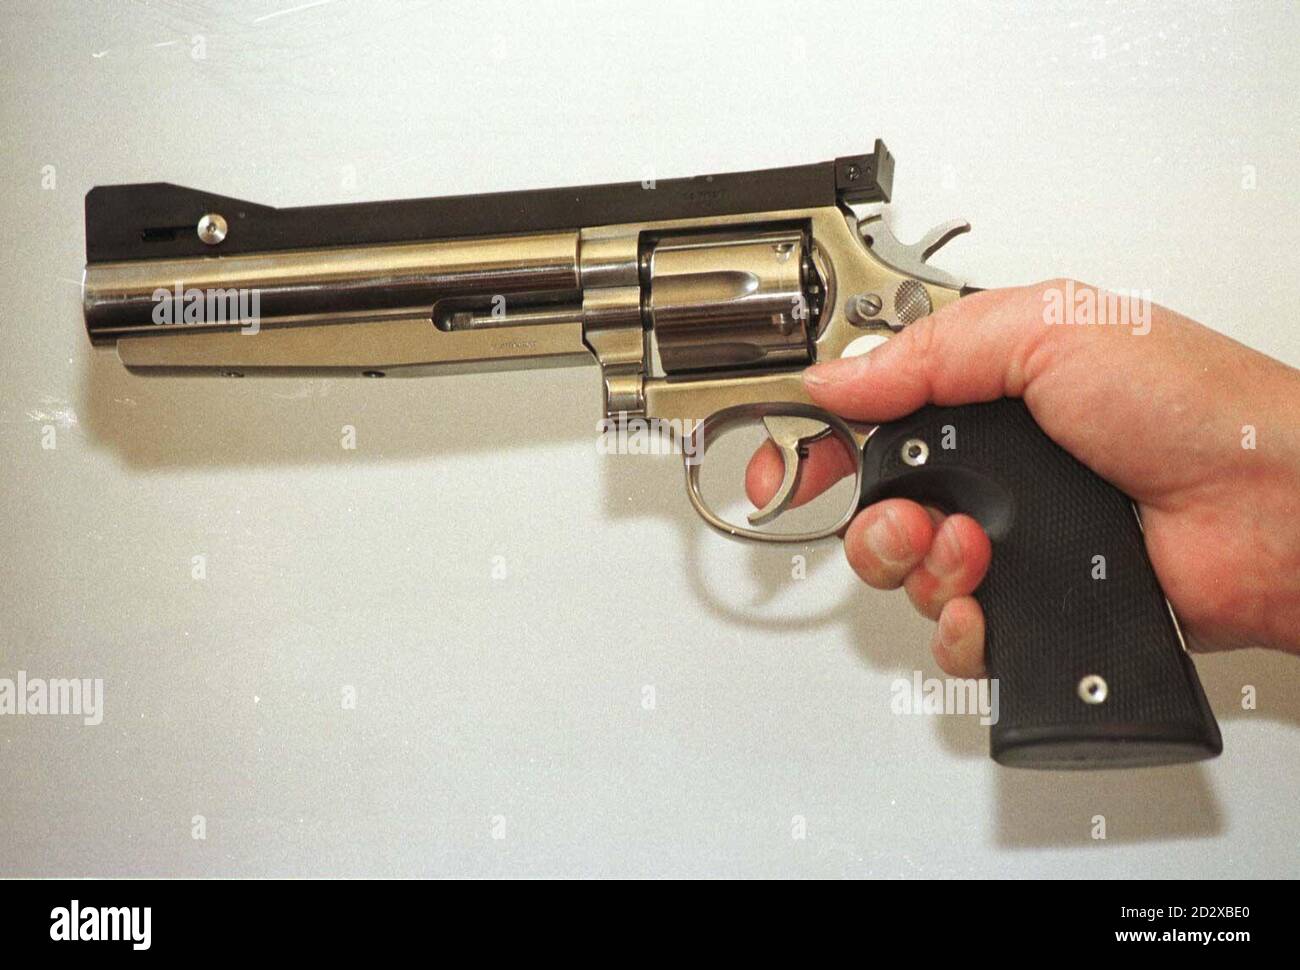 Smith And Wesson 38 Special High Resolution Stock Photography And Images Alamy